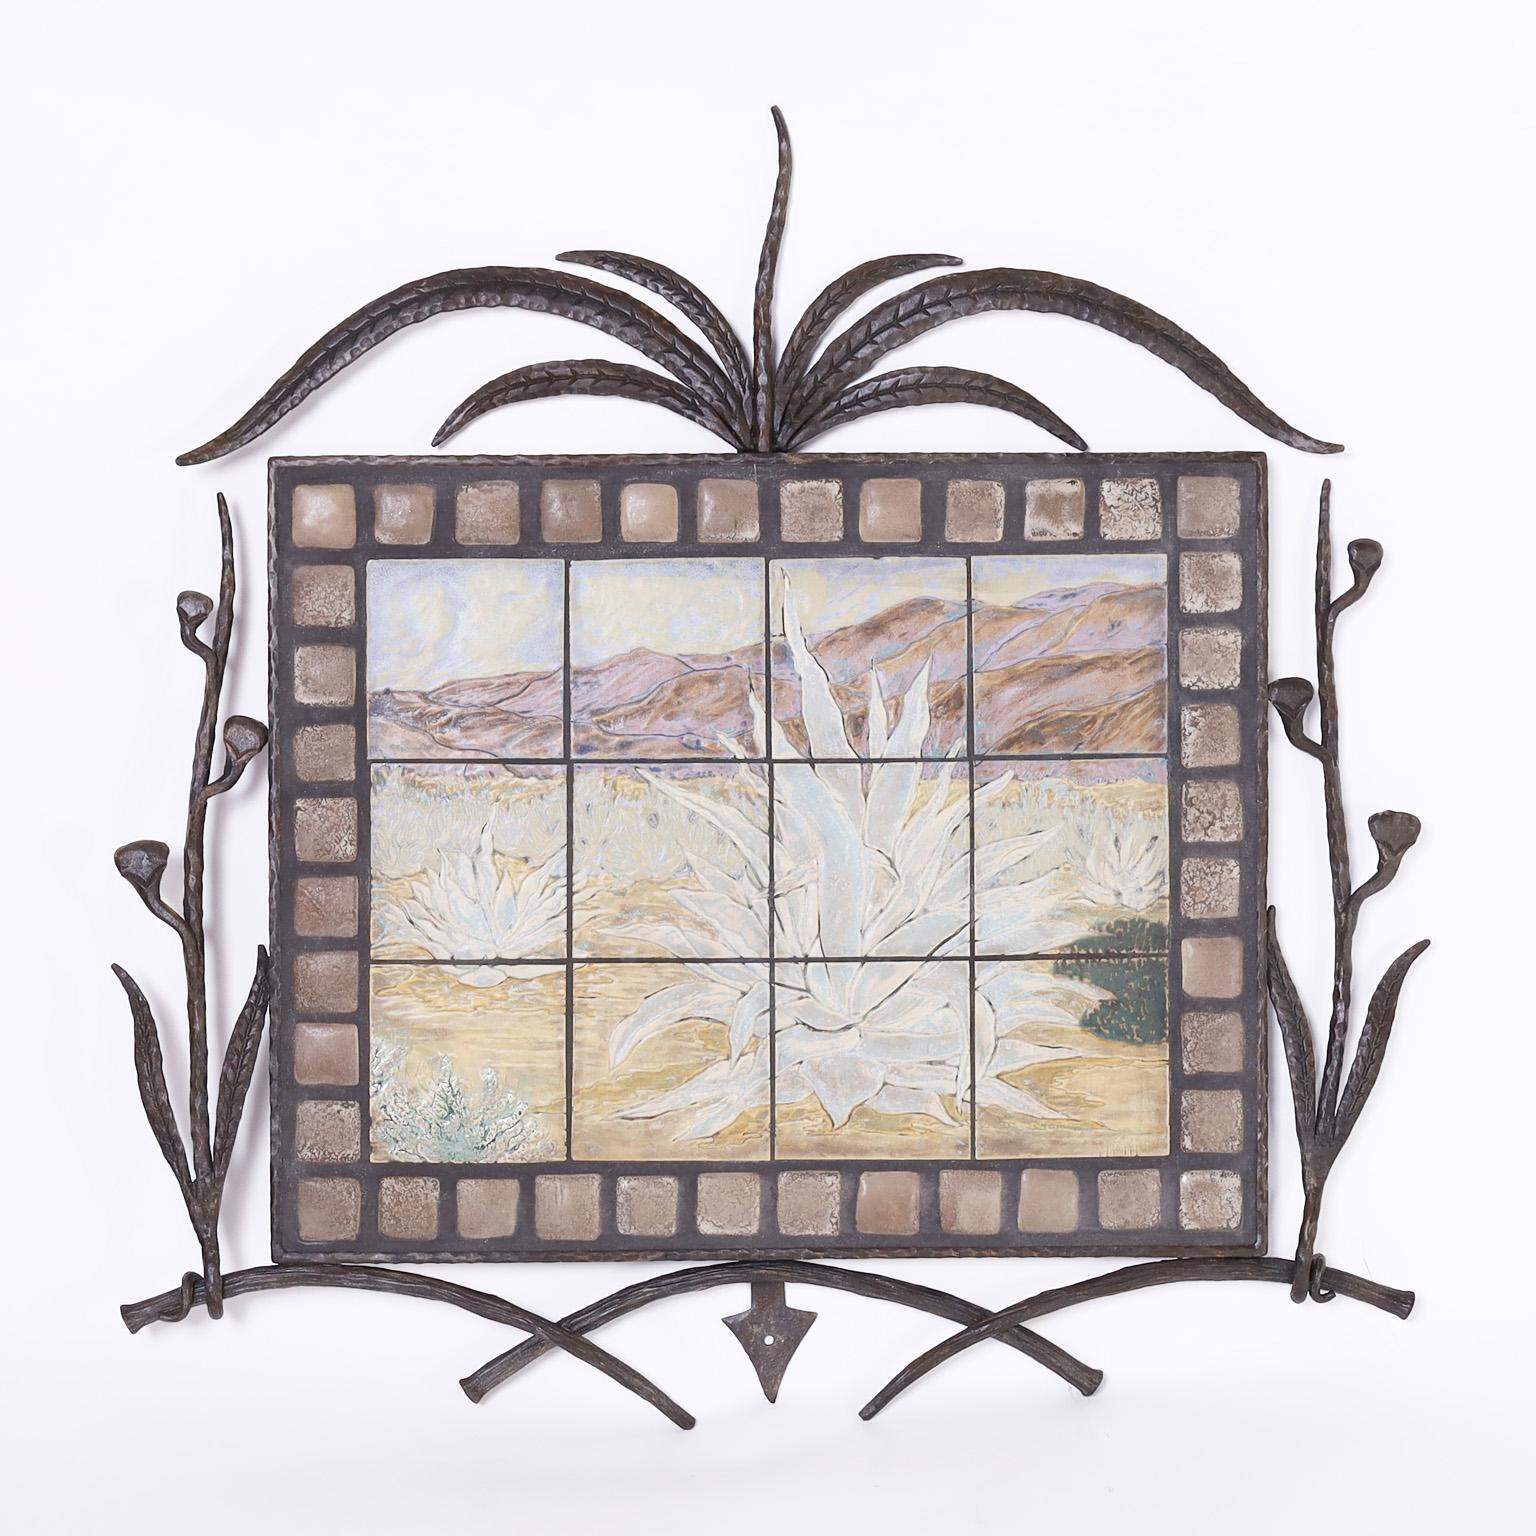 Tile Plaque with Iron Frame - Art by Unknown